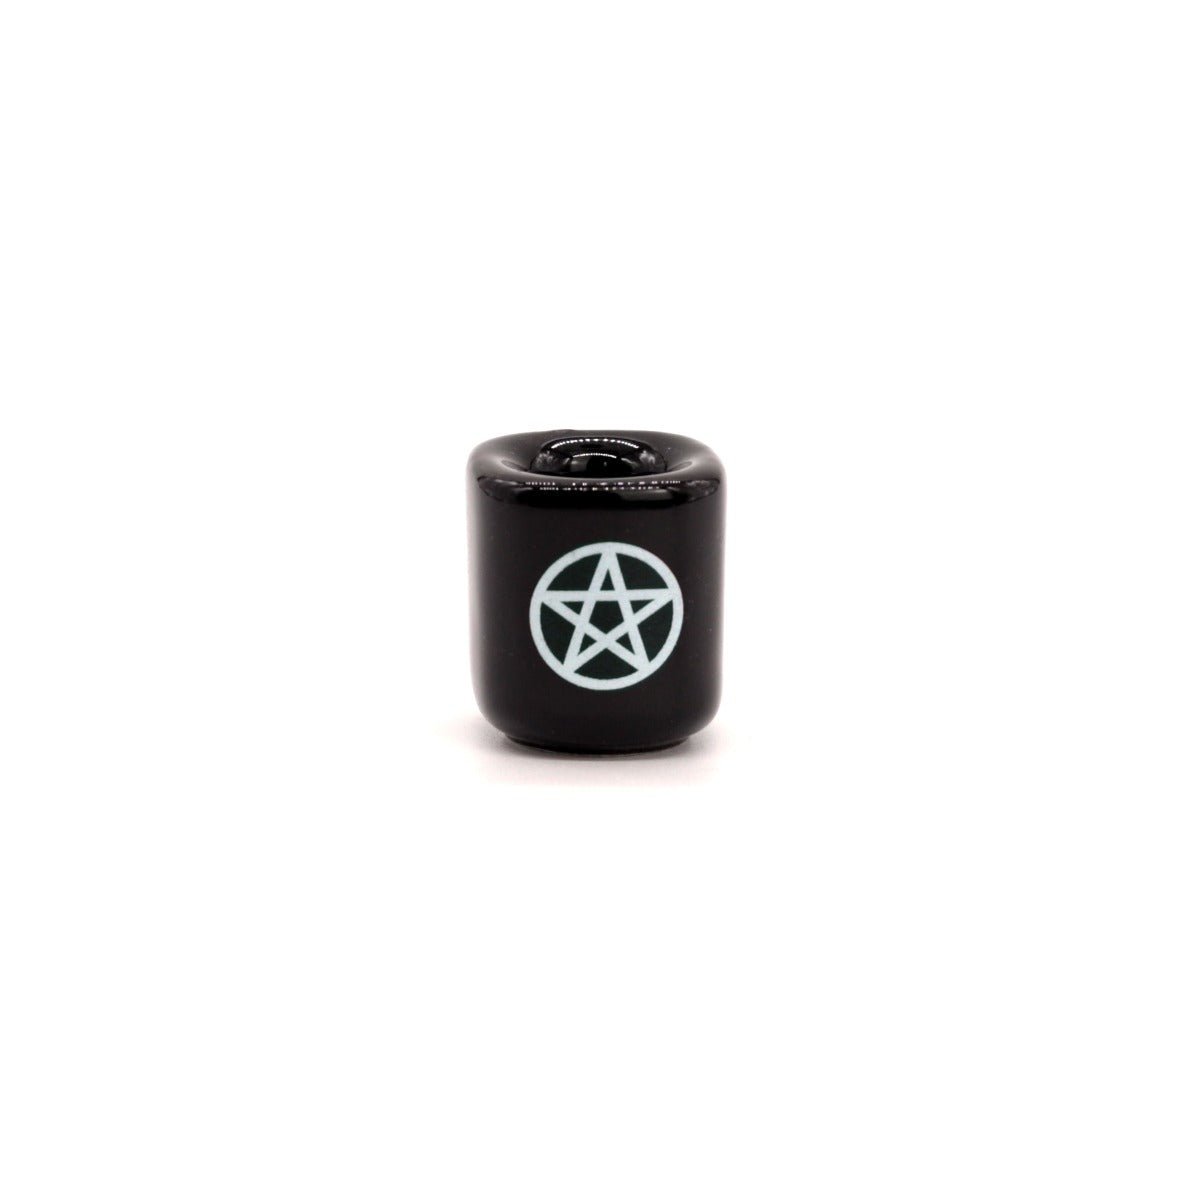 Black with Silver Pentacle Chime Candle Holder - 13 Moons